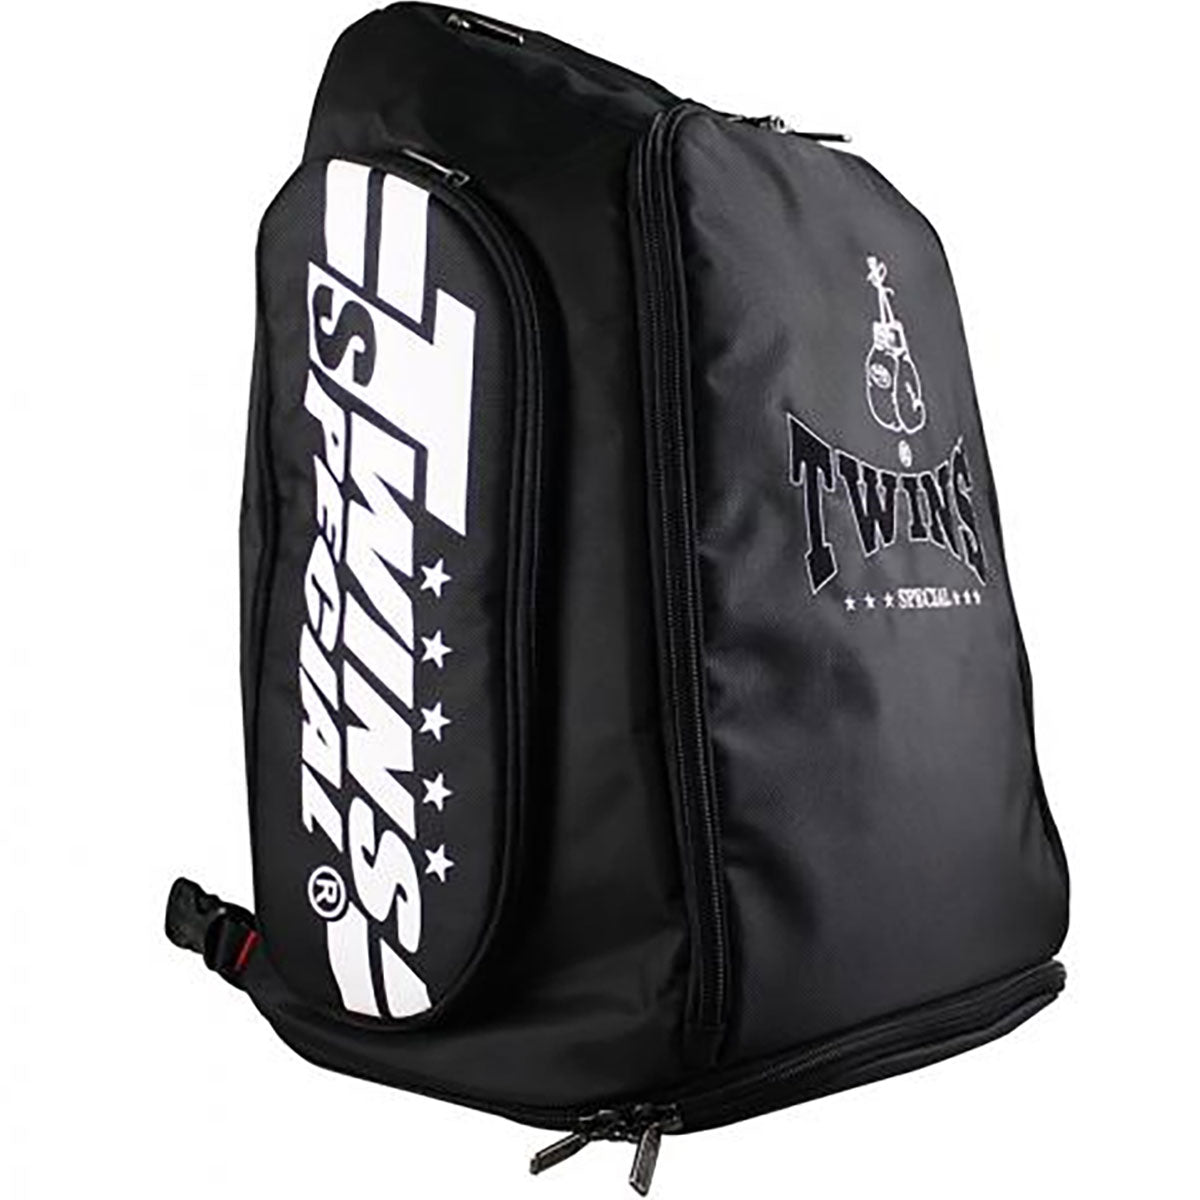 Backpack Sport Twins Special BAG5